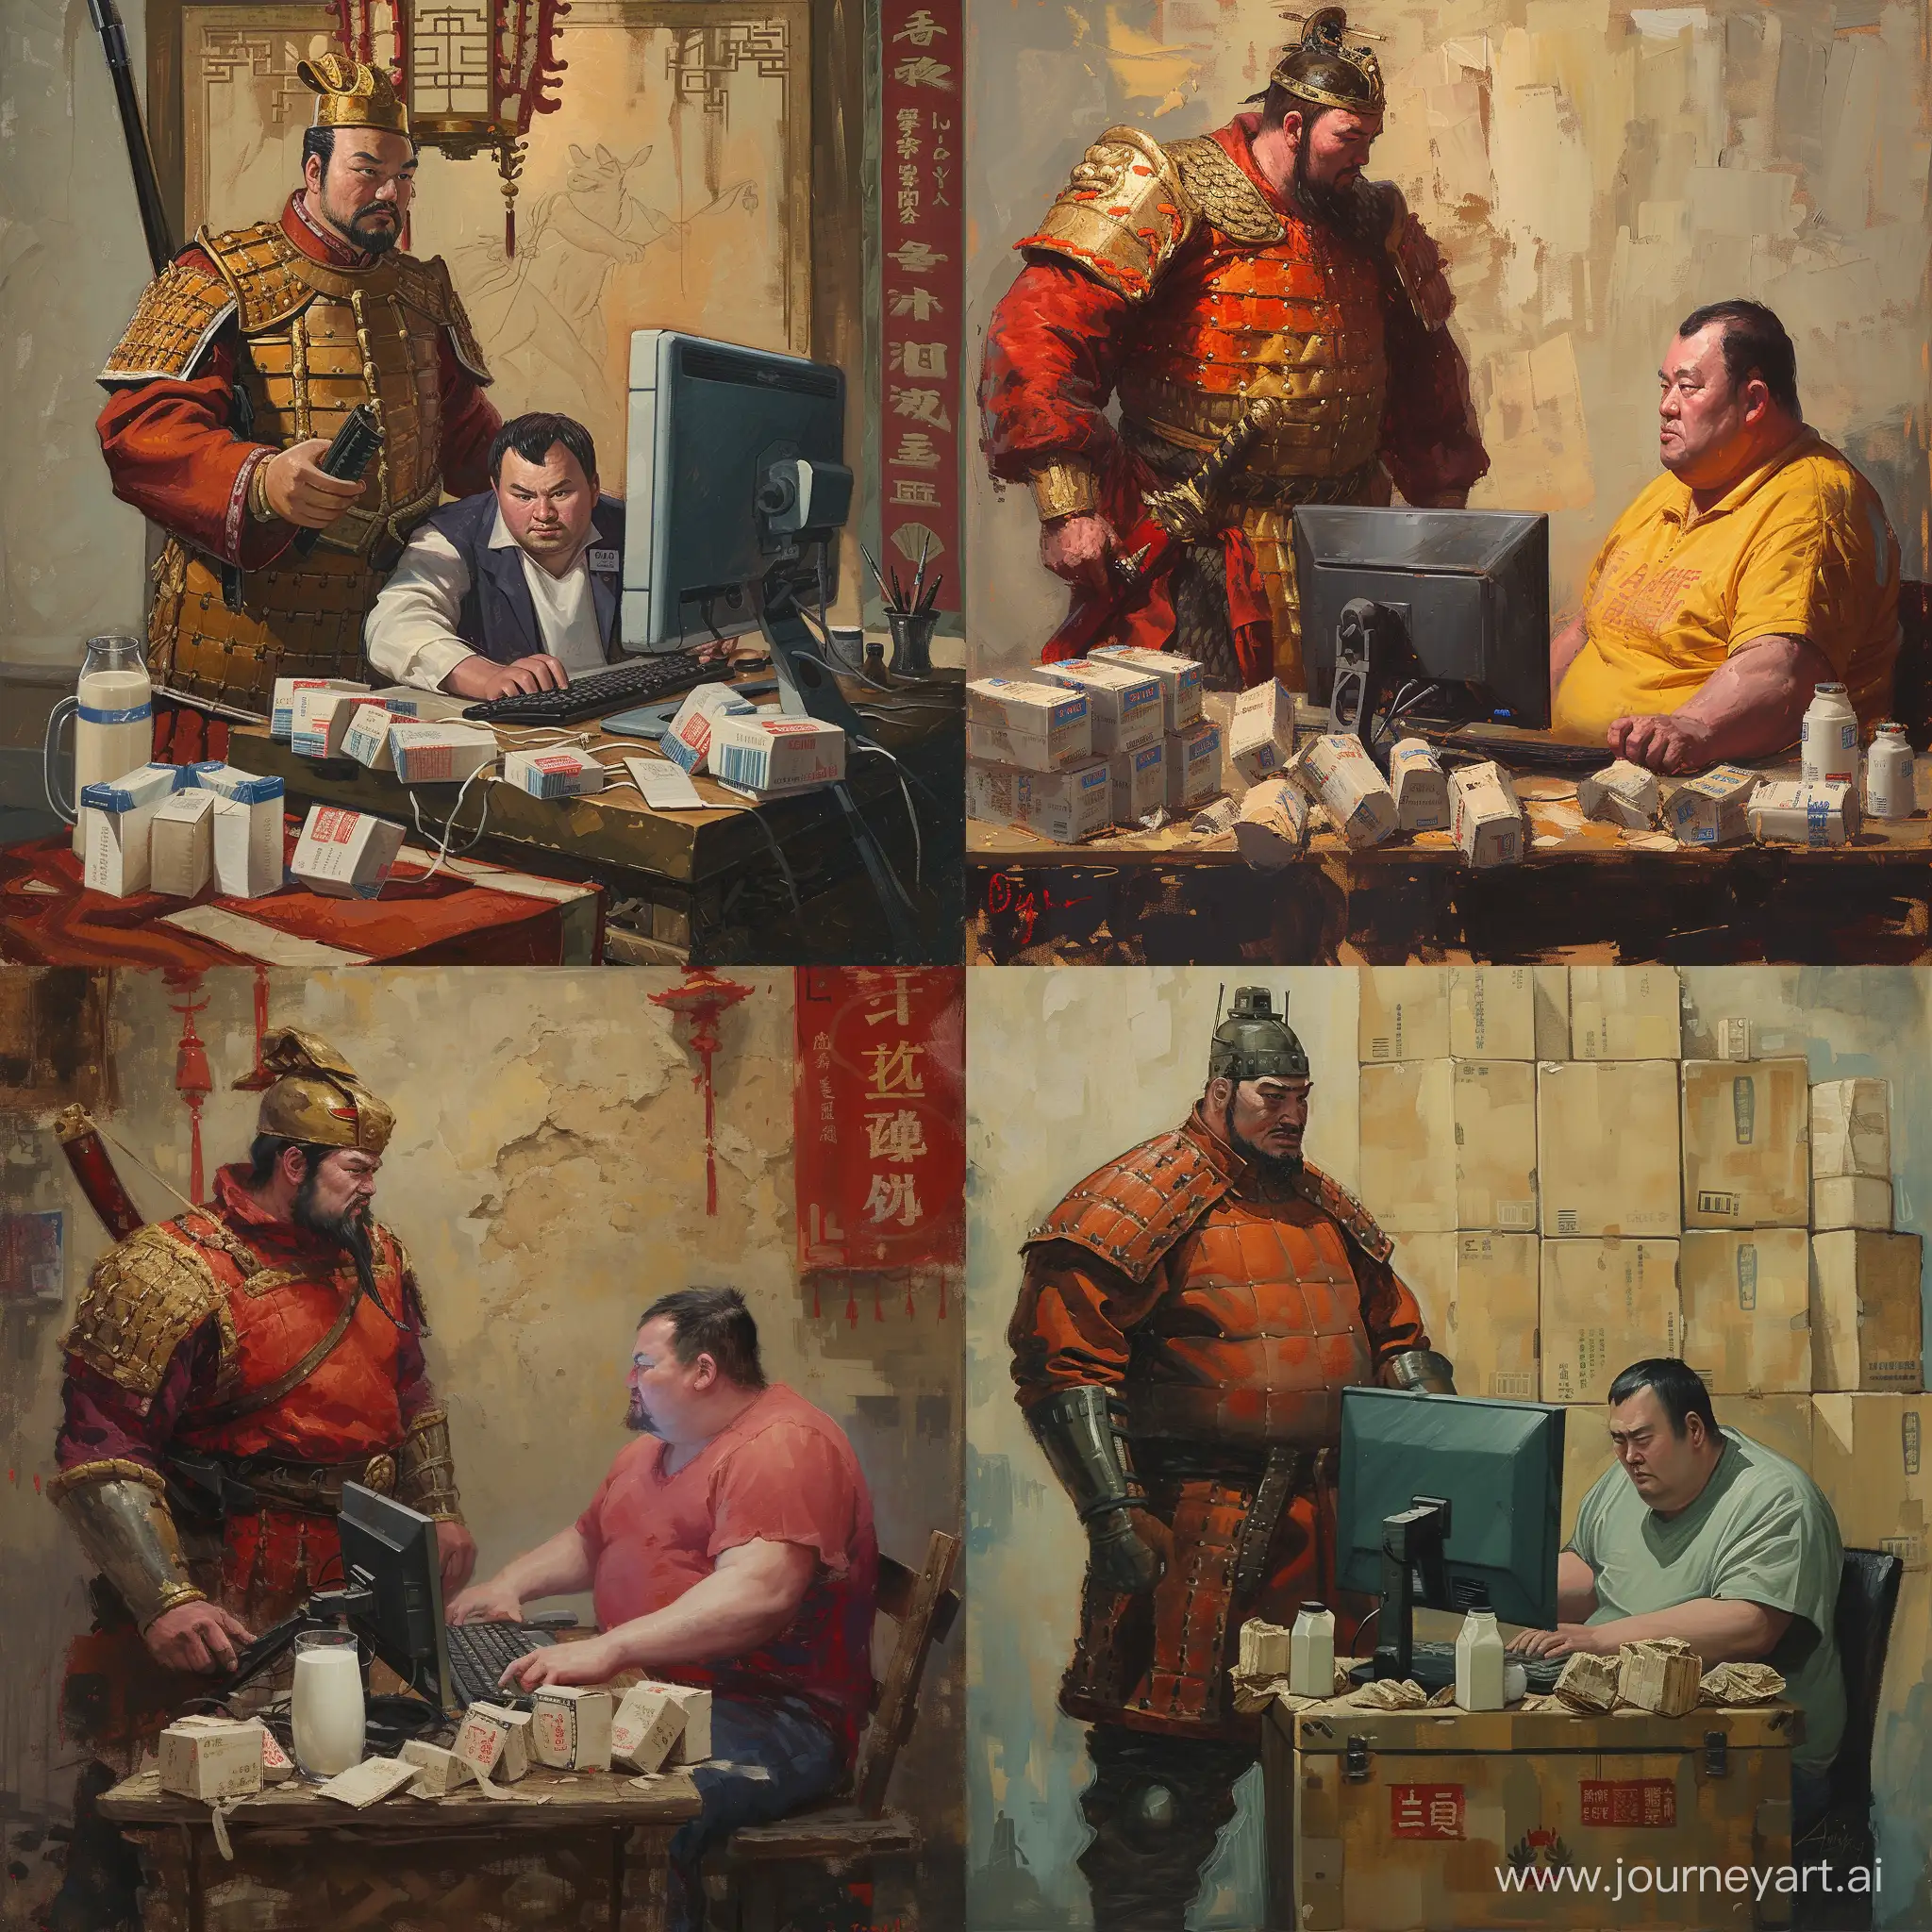 Medieval-Chinese-Soldier-Supervising-a-Unique-DayTrading-Scene-with-Soy-Milk